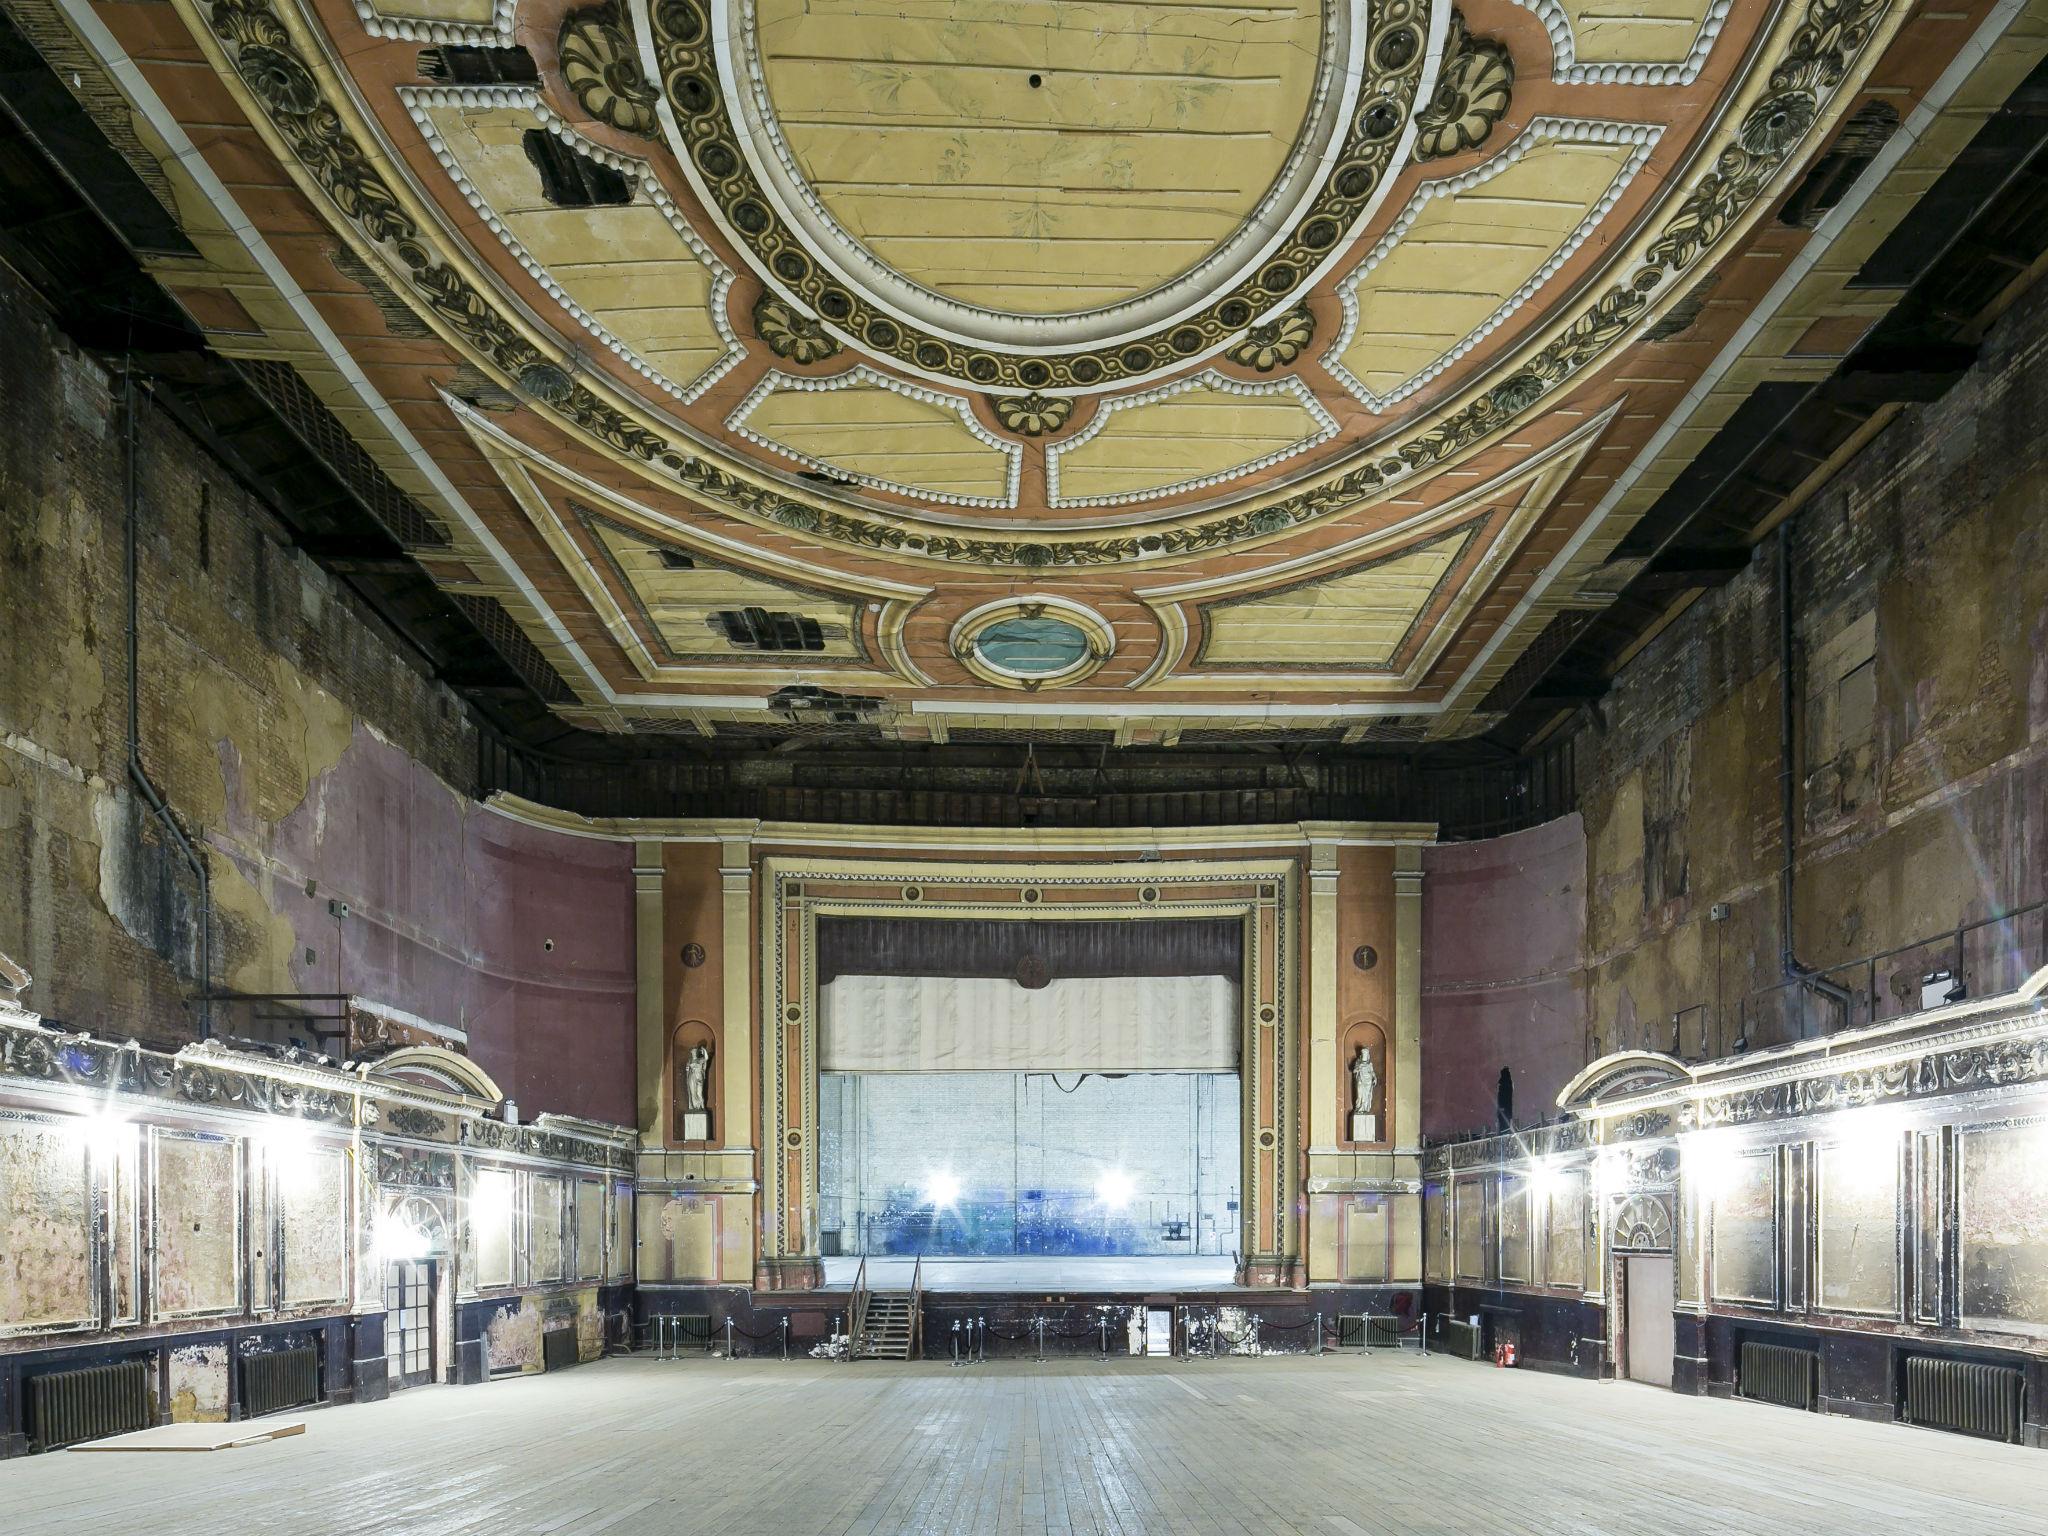 The Victorian theatre at Alexandra Palace is currently in the middle of renovation, but will host a Prom